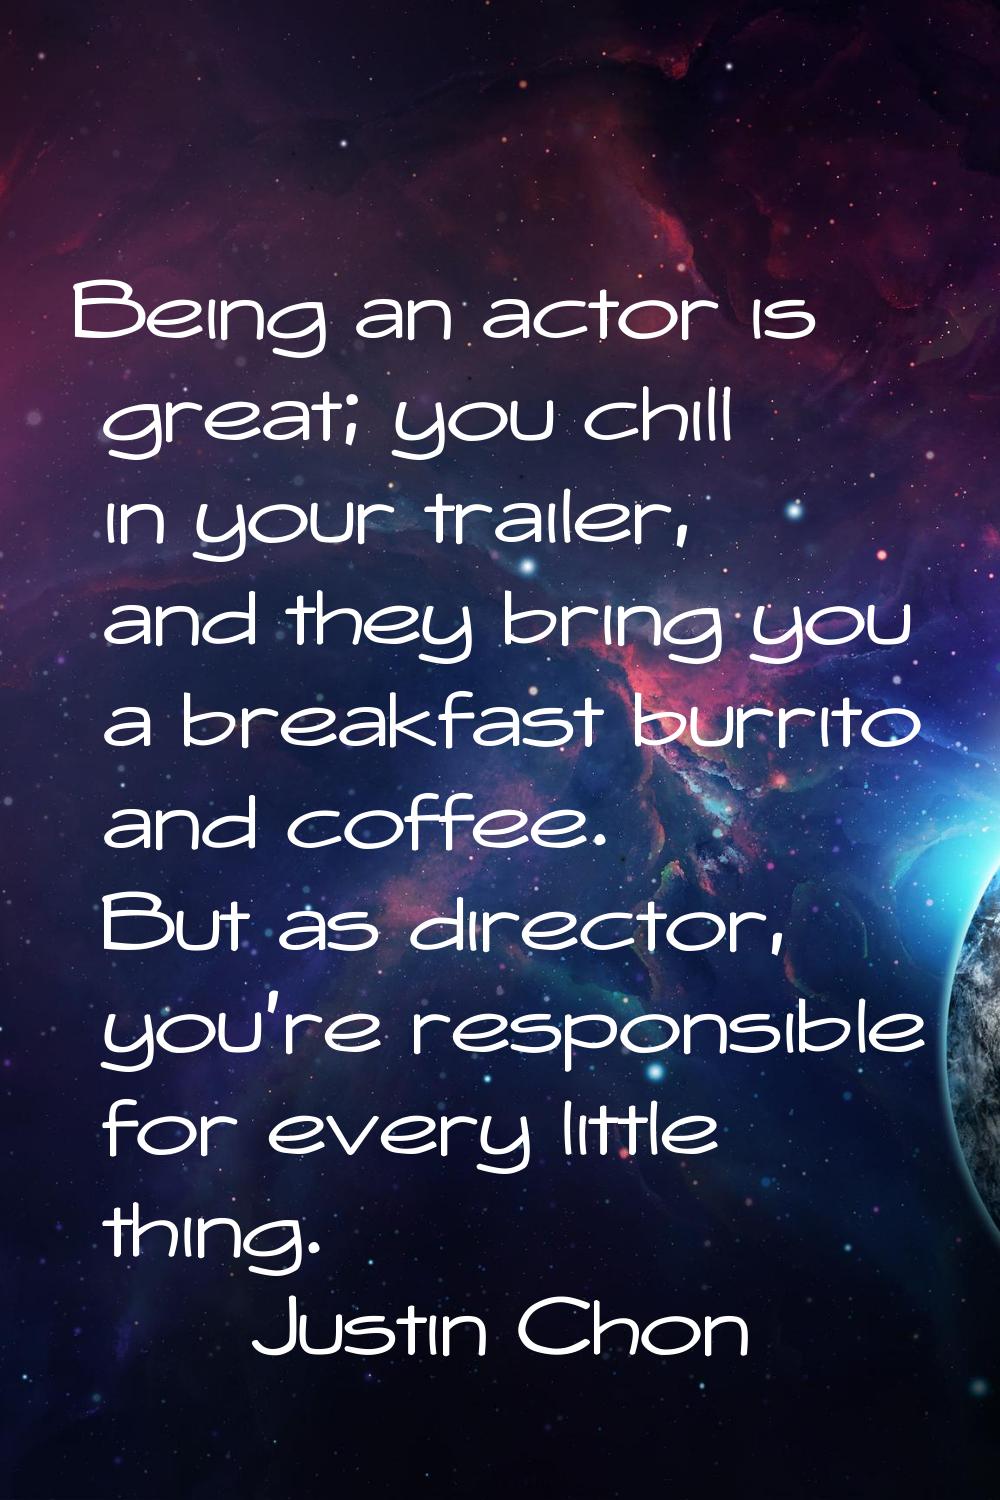 Being an actor is great; you chill in your trailer, and they bring you a breakfast burrito and coff